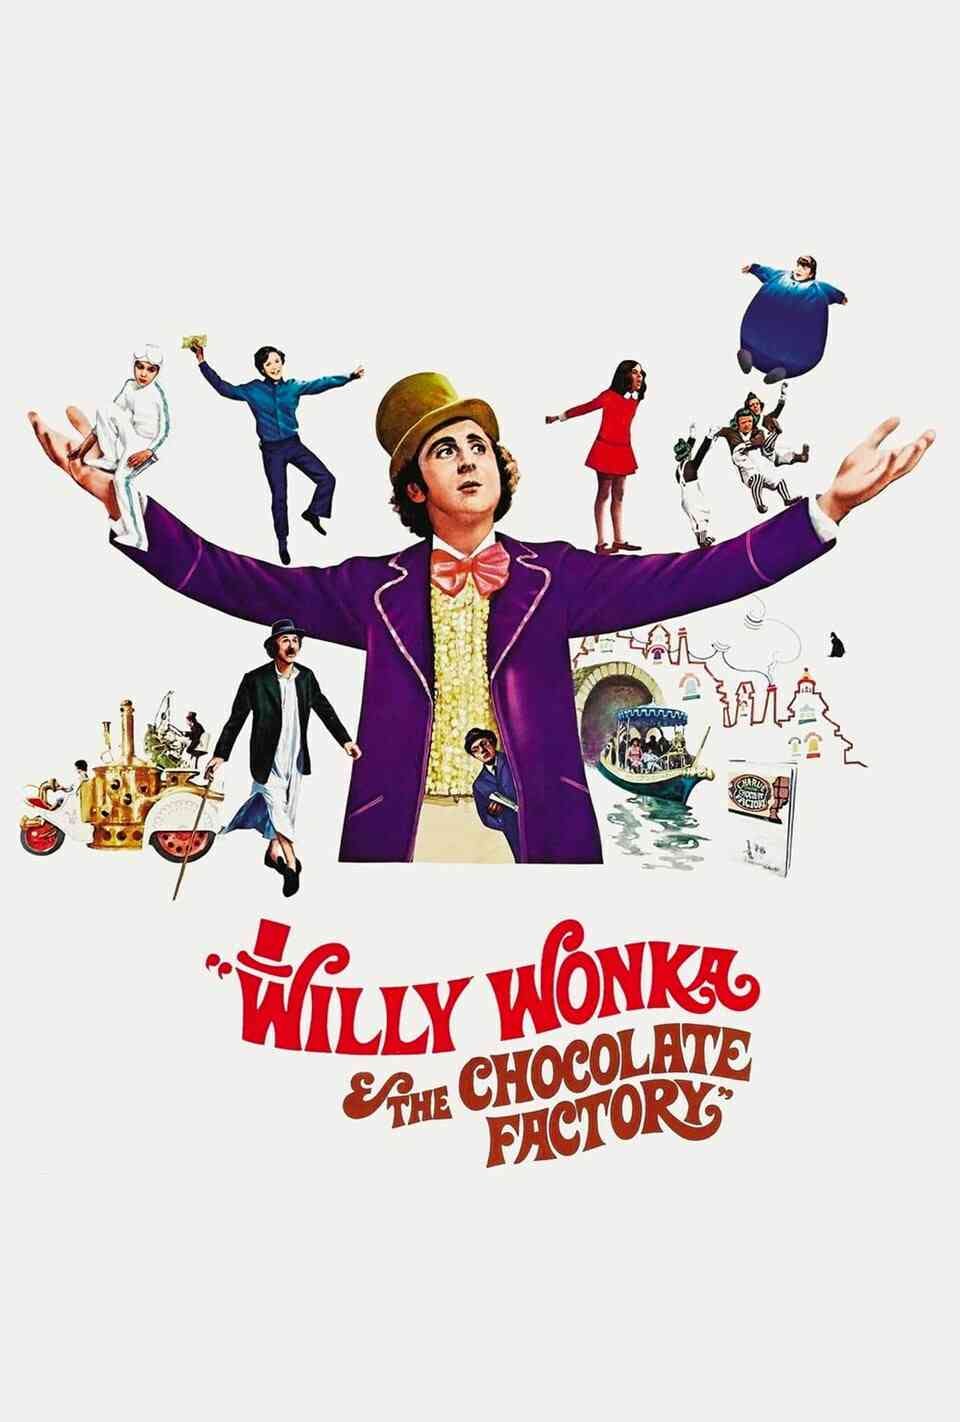 Read Willy Wonka & the Chocolate Factory screenplay (poster)